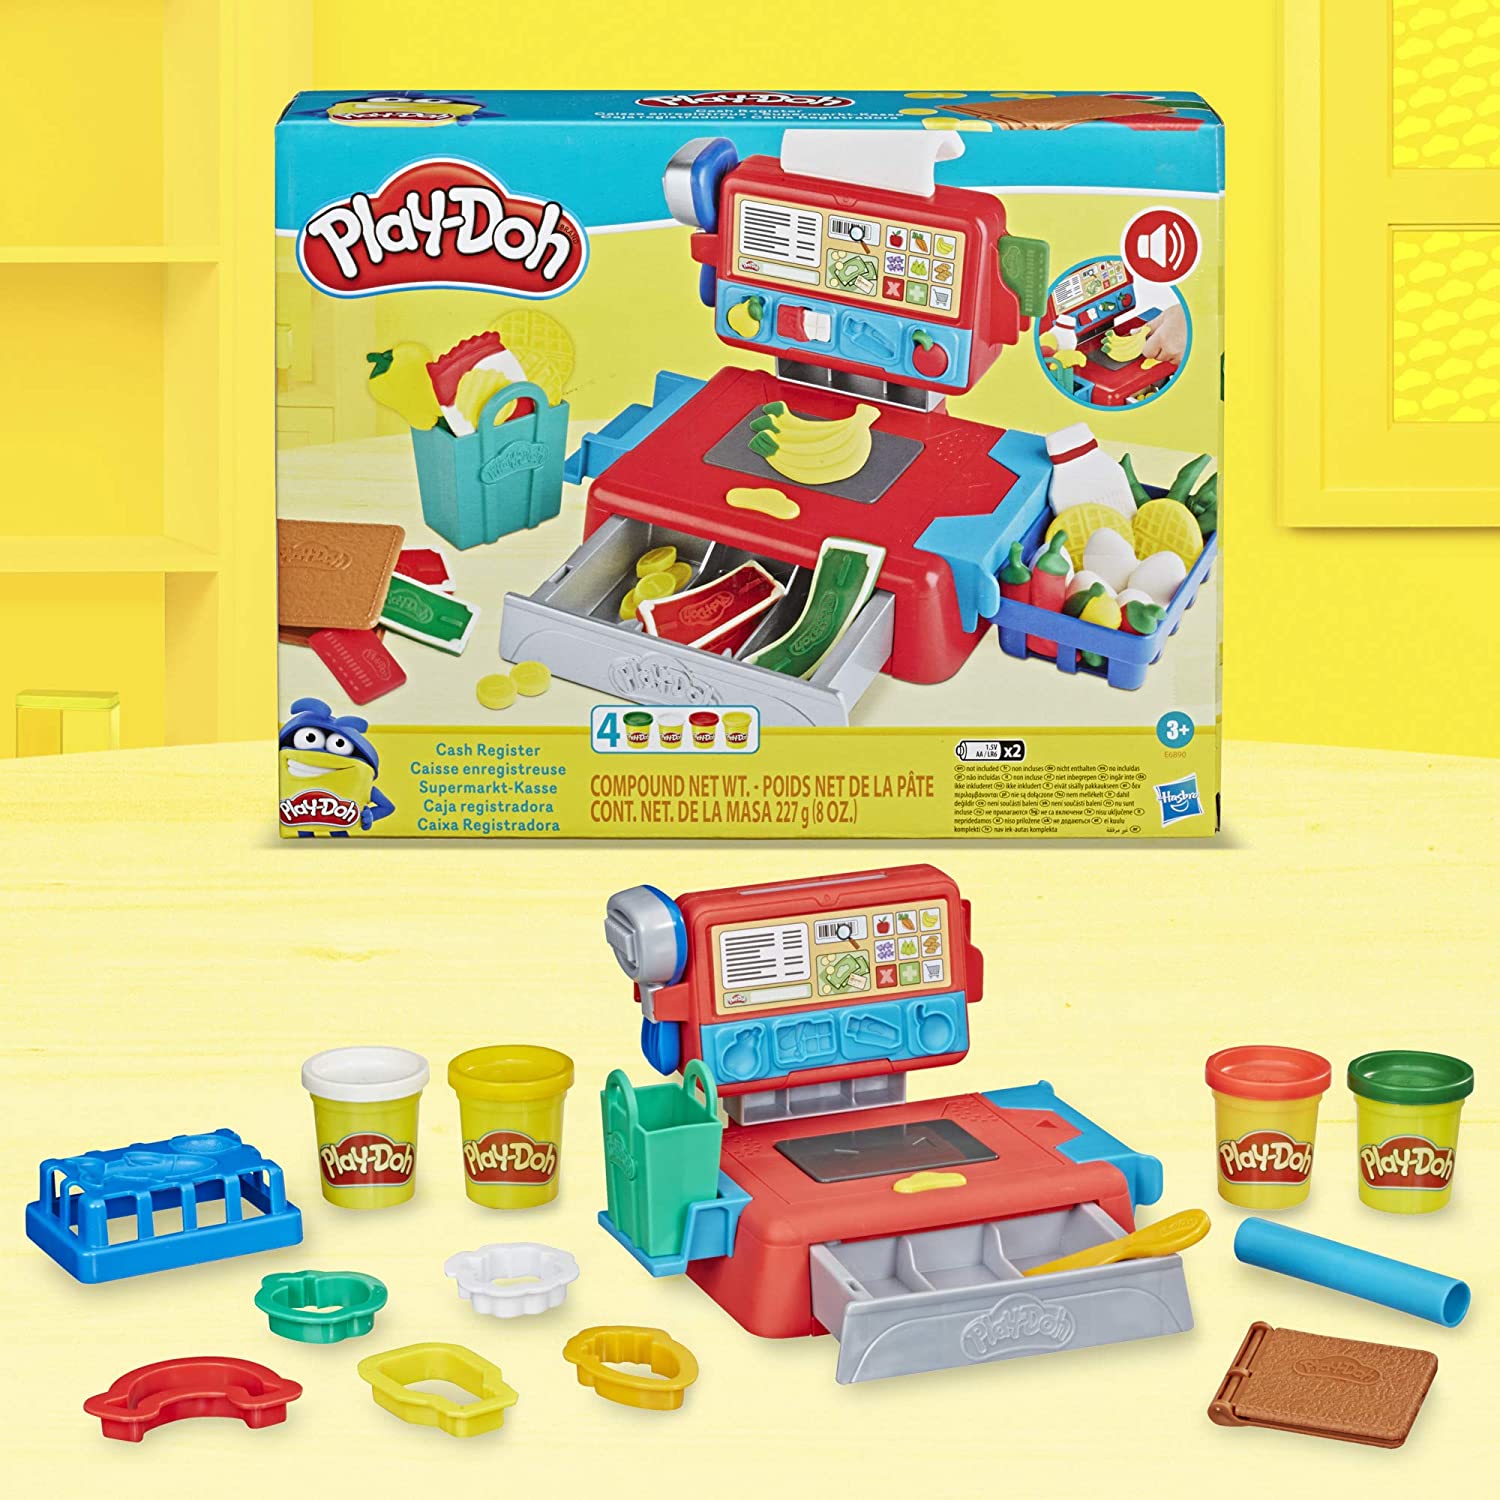 Play-Doh Cash Register Toy for Kids 3 Years and up with Fun Sounds, Play Food Accessories and 4 Non-Toxic Colors - image 2 of 4